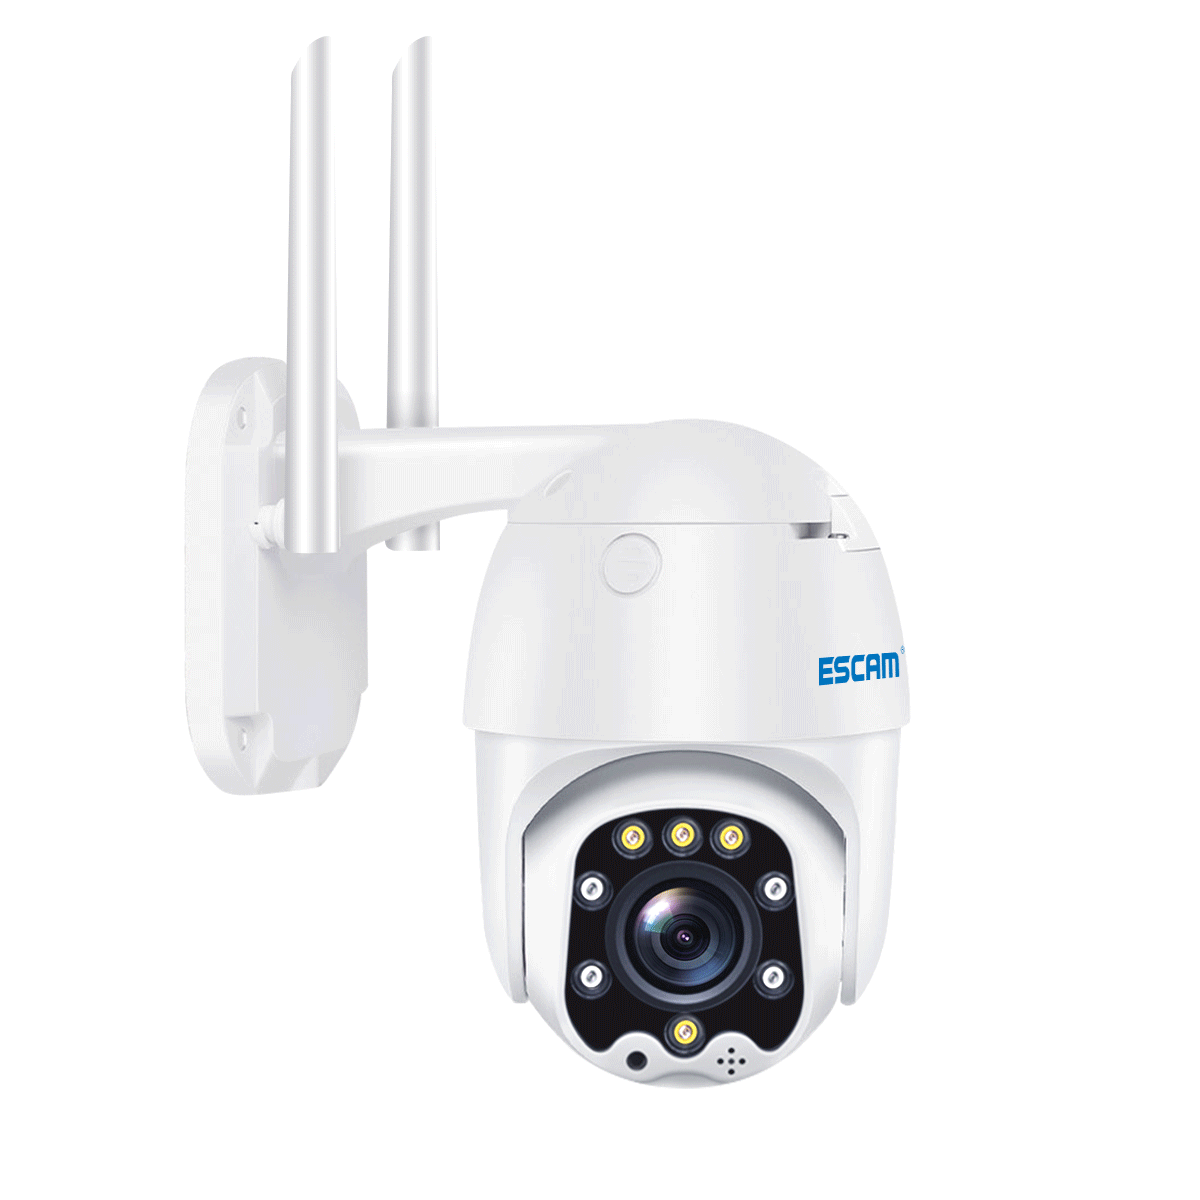 ESCAM-QF288-3MP-PanTilt-8X-Zoom-AI-Humanoid-detection-Cloud-Storage-Waterproof-WiFi-IP-Camera-with-T-1693500-1